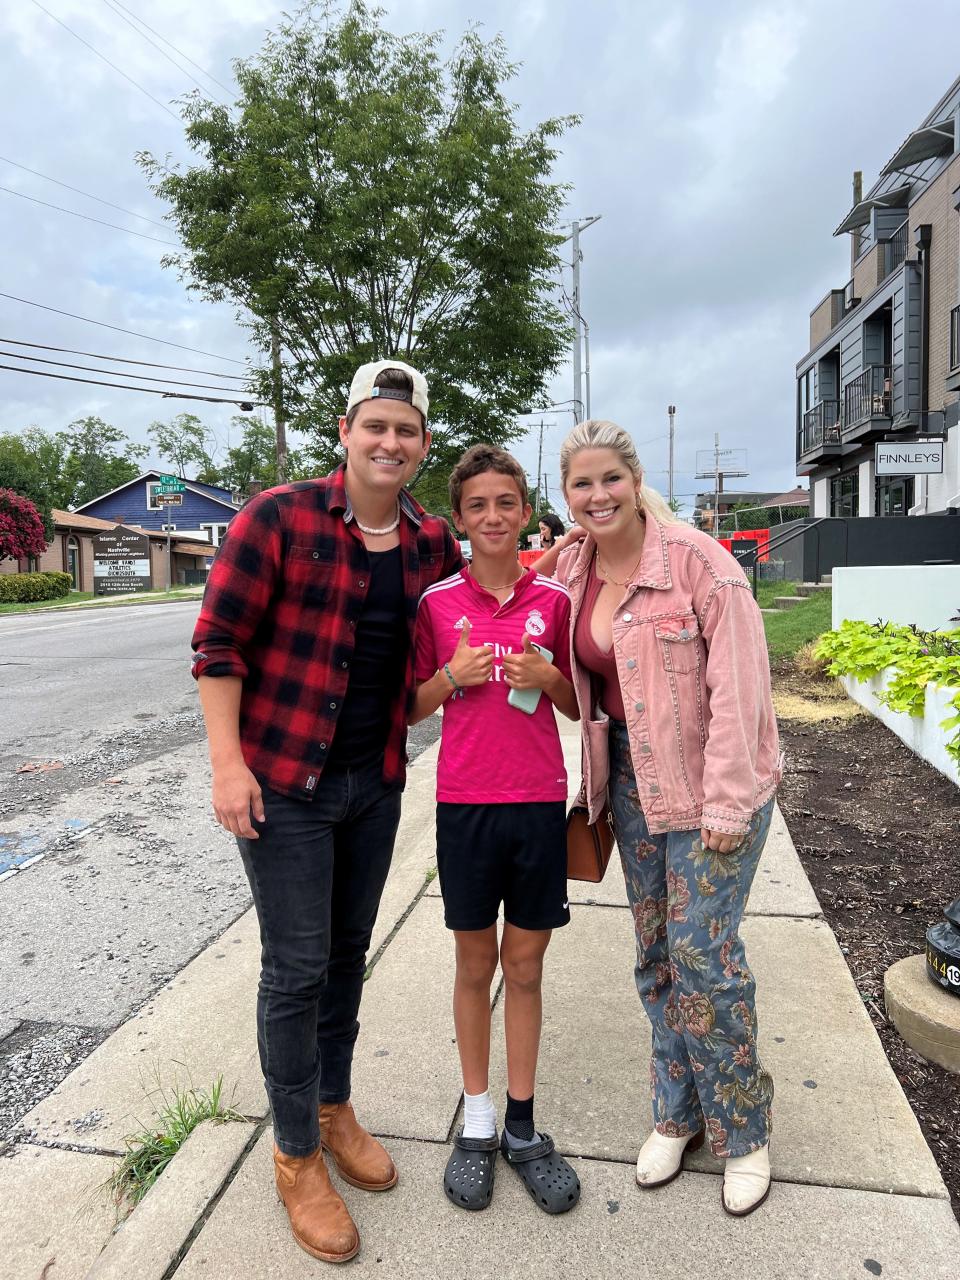 TikTok big tipper Lexy Burke, right, with her husband, Austin, who gave 11-year-old Niko $1,100 July 27, 2022, for one of the $3 glasses of lemonade Niko was selling along 12 South in Nashville, Tenn. The two videos of Niko got more than 30 million views in a week.